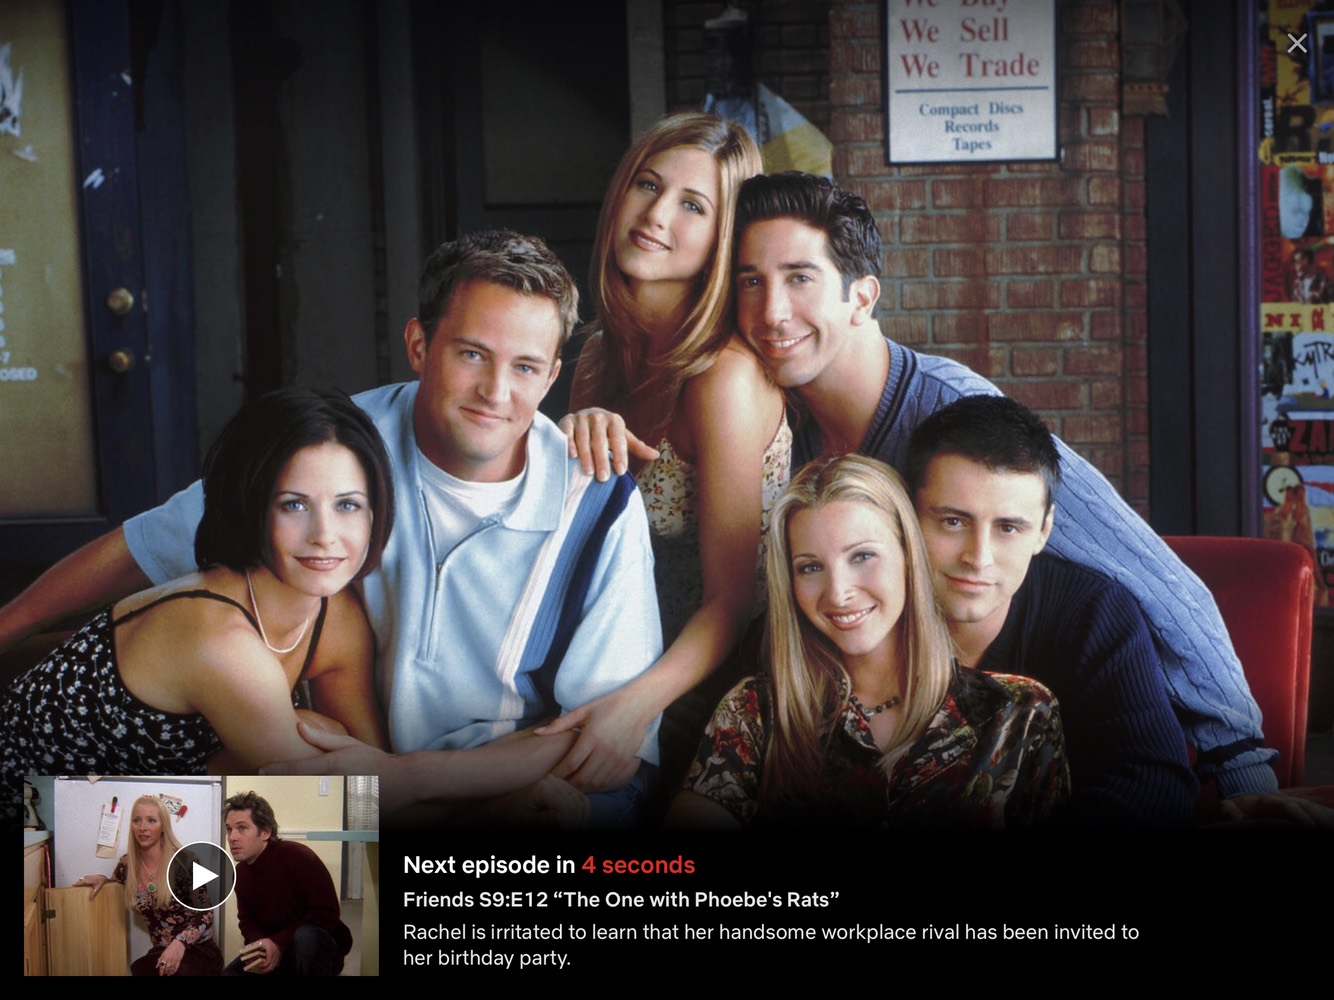 Netflix app shows a group photo of Friends cast, with a thumbnail of the next episode and a countdown to start the next episode with 4 seconds on the clock.